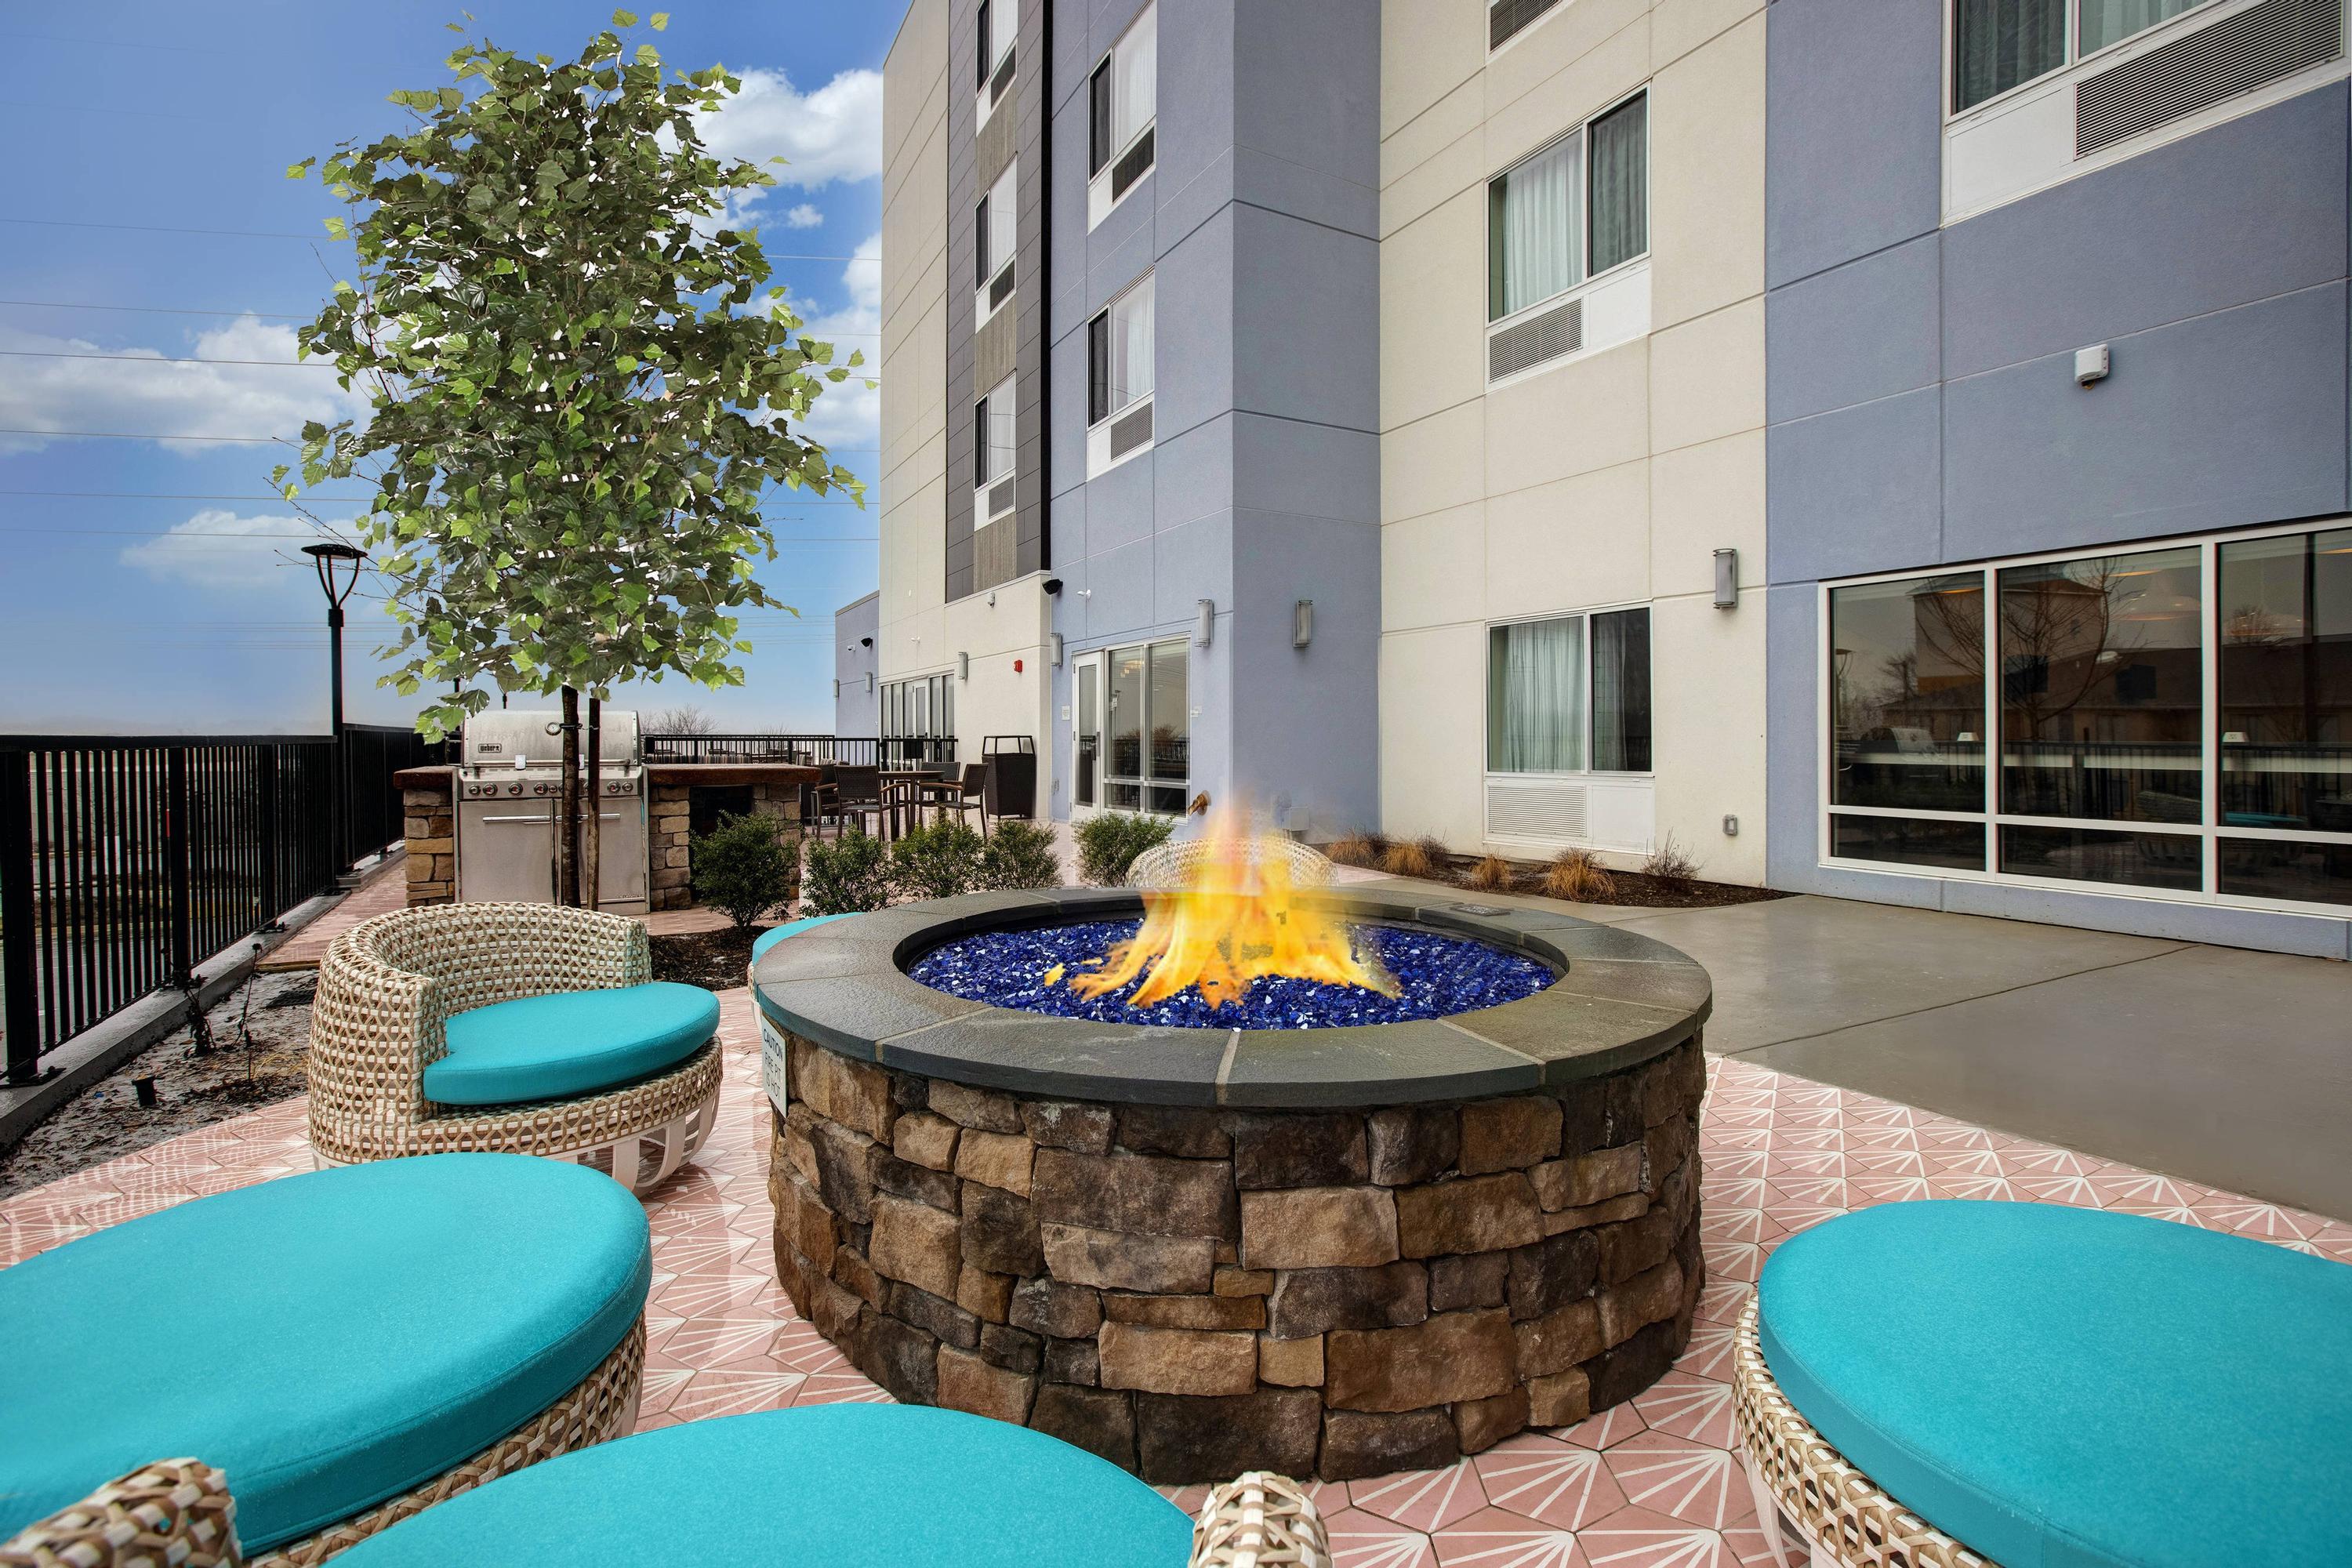 TownePlace Suites by Marriott Potomac Mills Woodbridge from $126